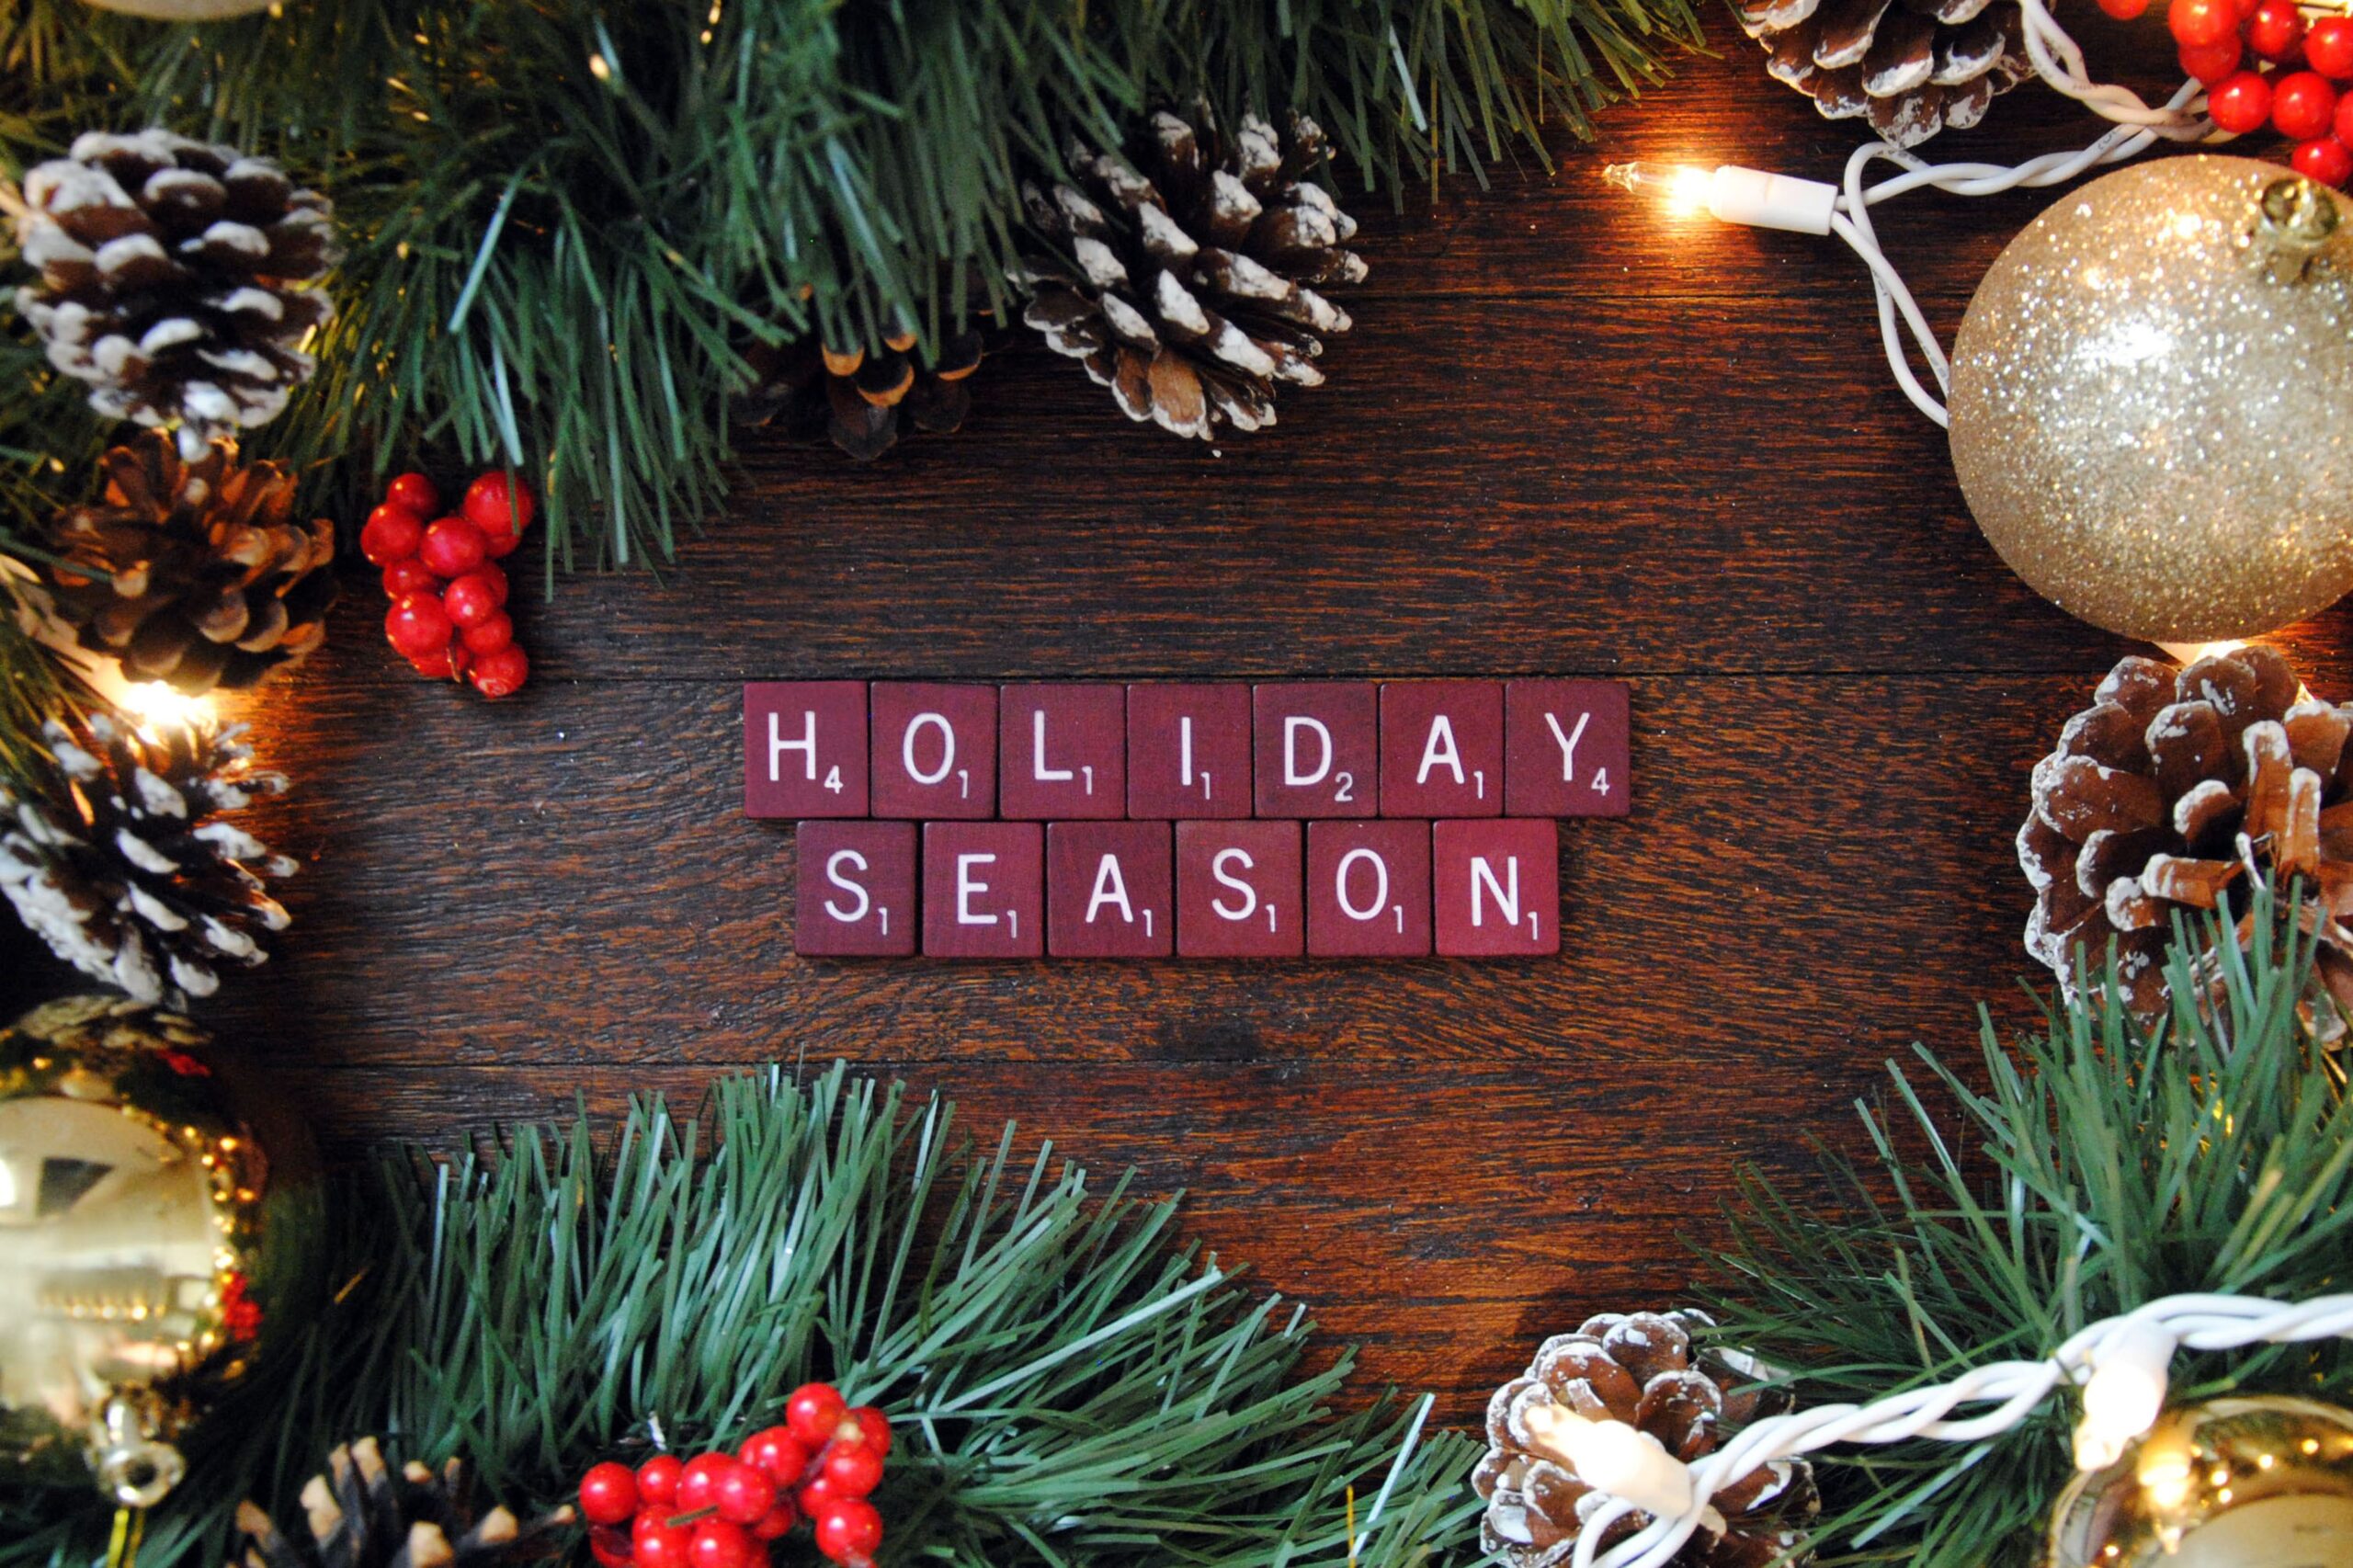 festive holiday image with pine cones, ornaments, white string lights, and letter blocks spelling holiday season